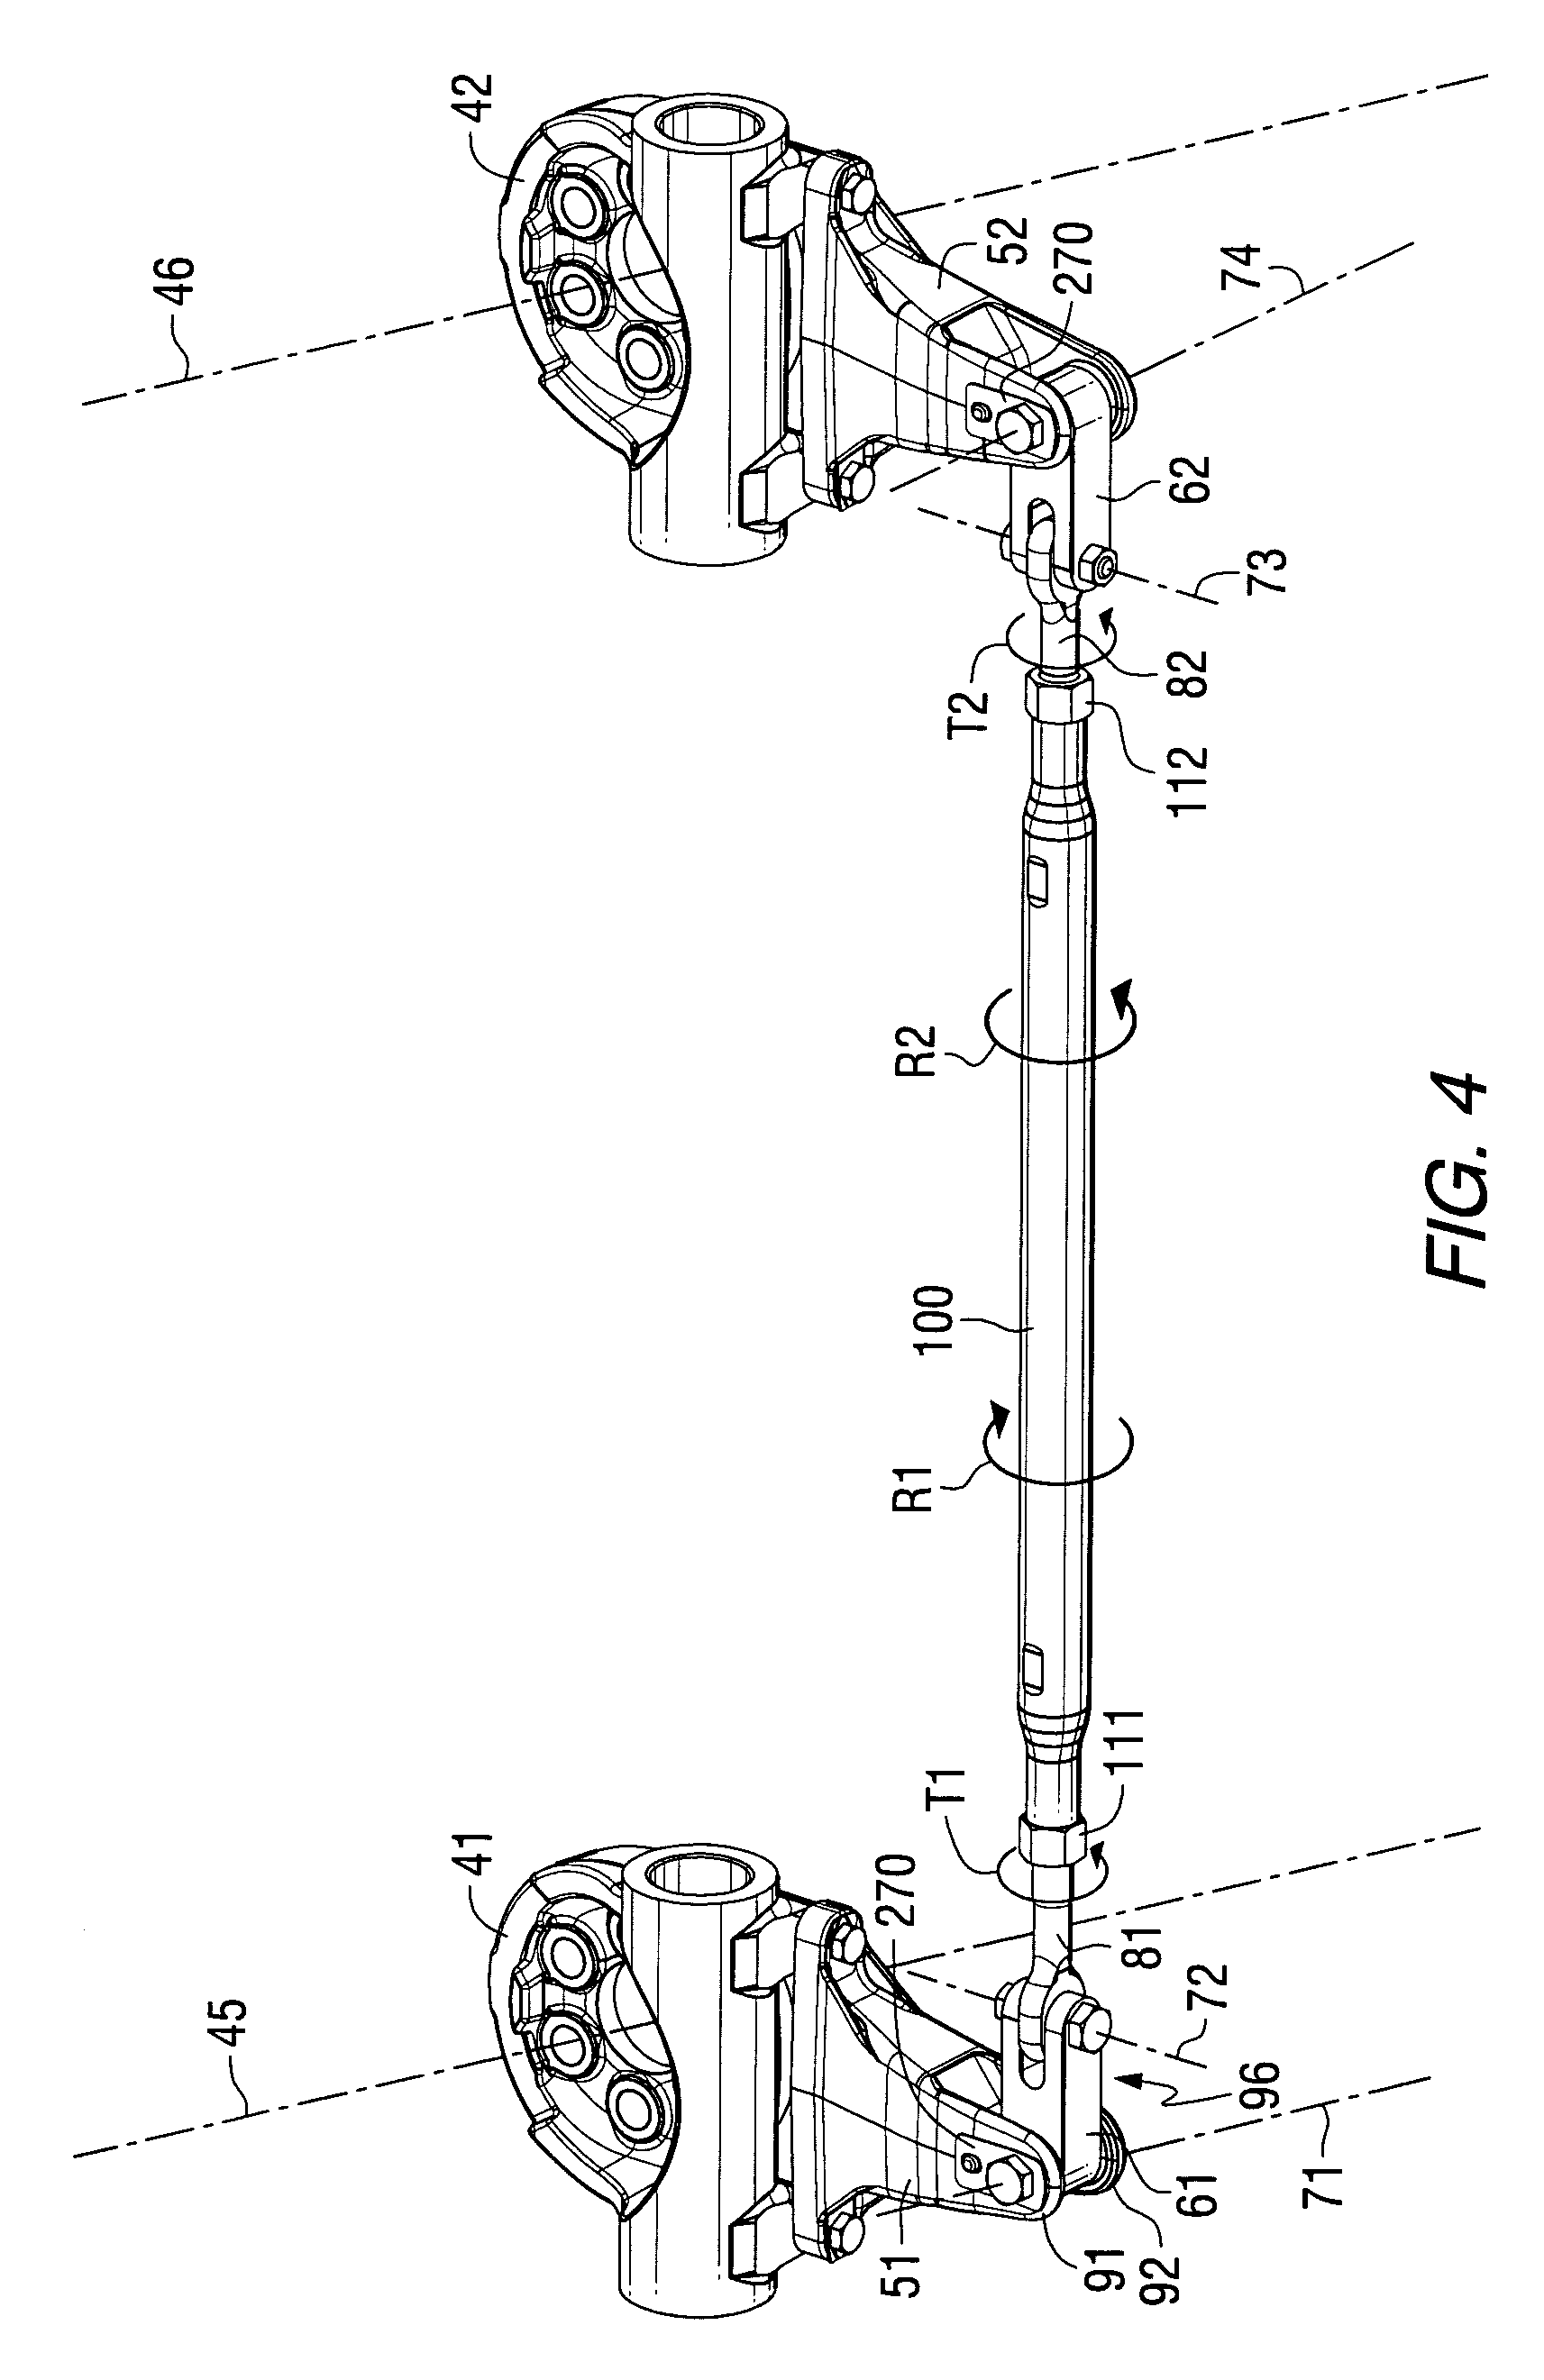 Tandem connection system for two or more marine propulsion devices